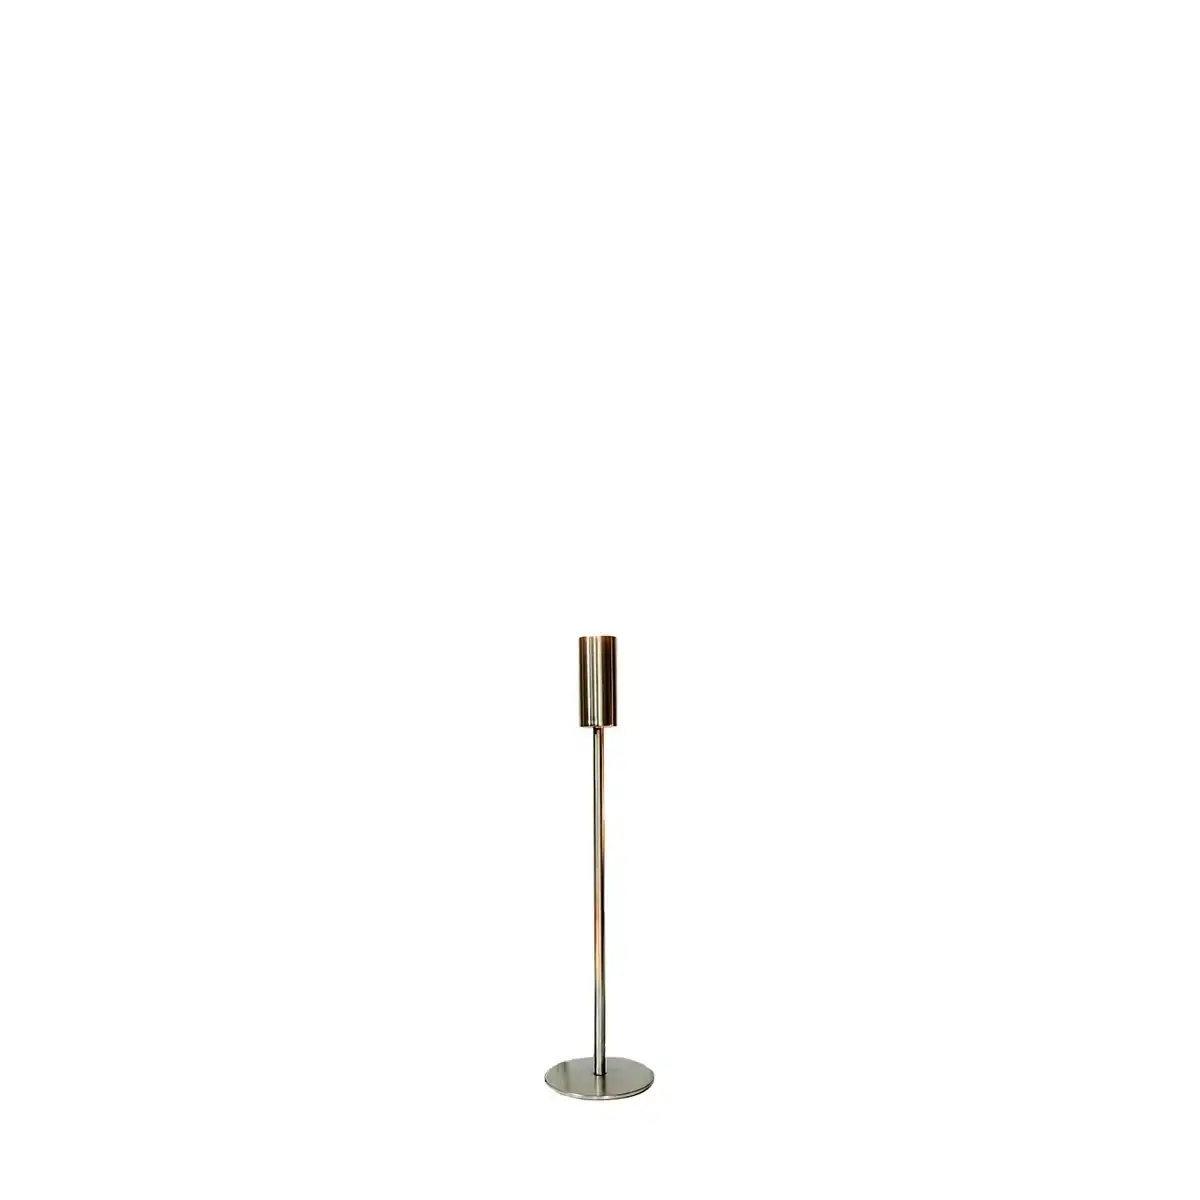 SSH Collection Ava 50cm Tall Single Candle Stand - Nickel